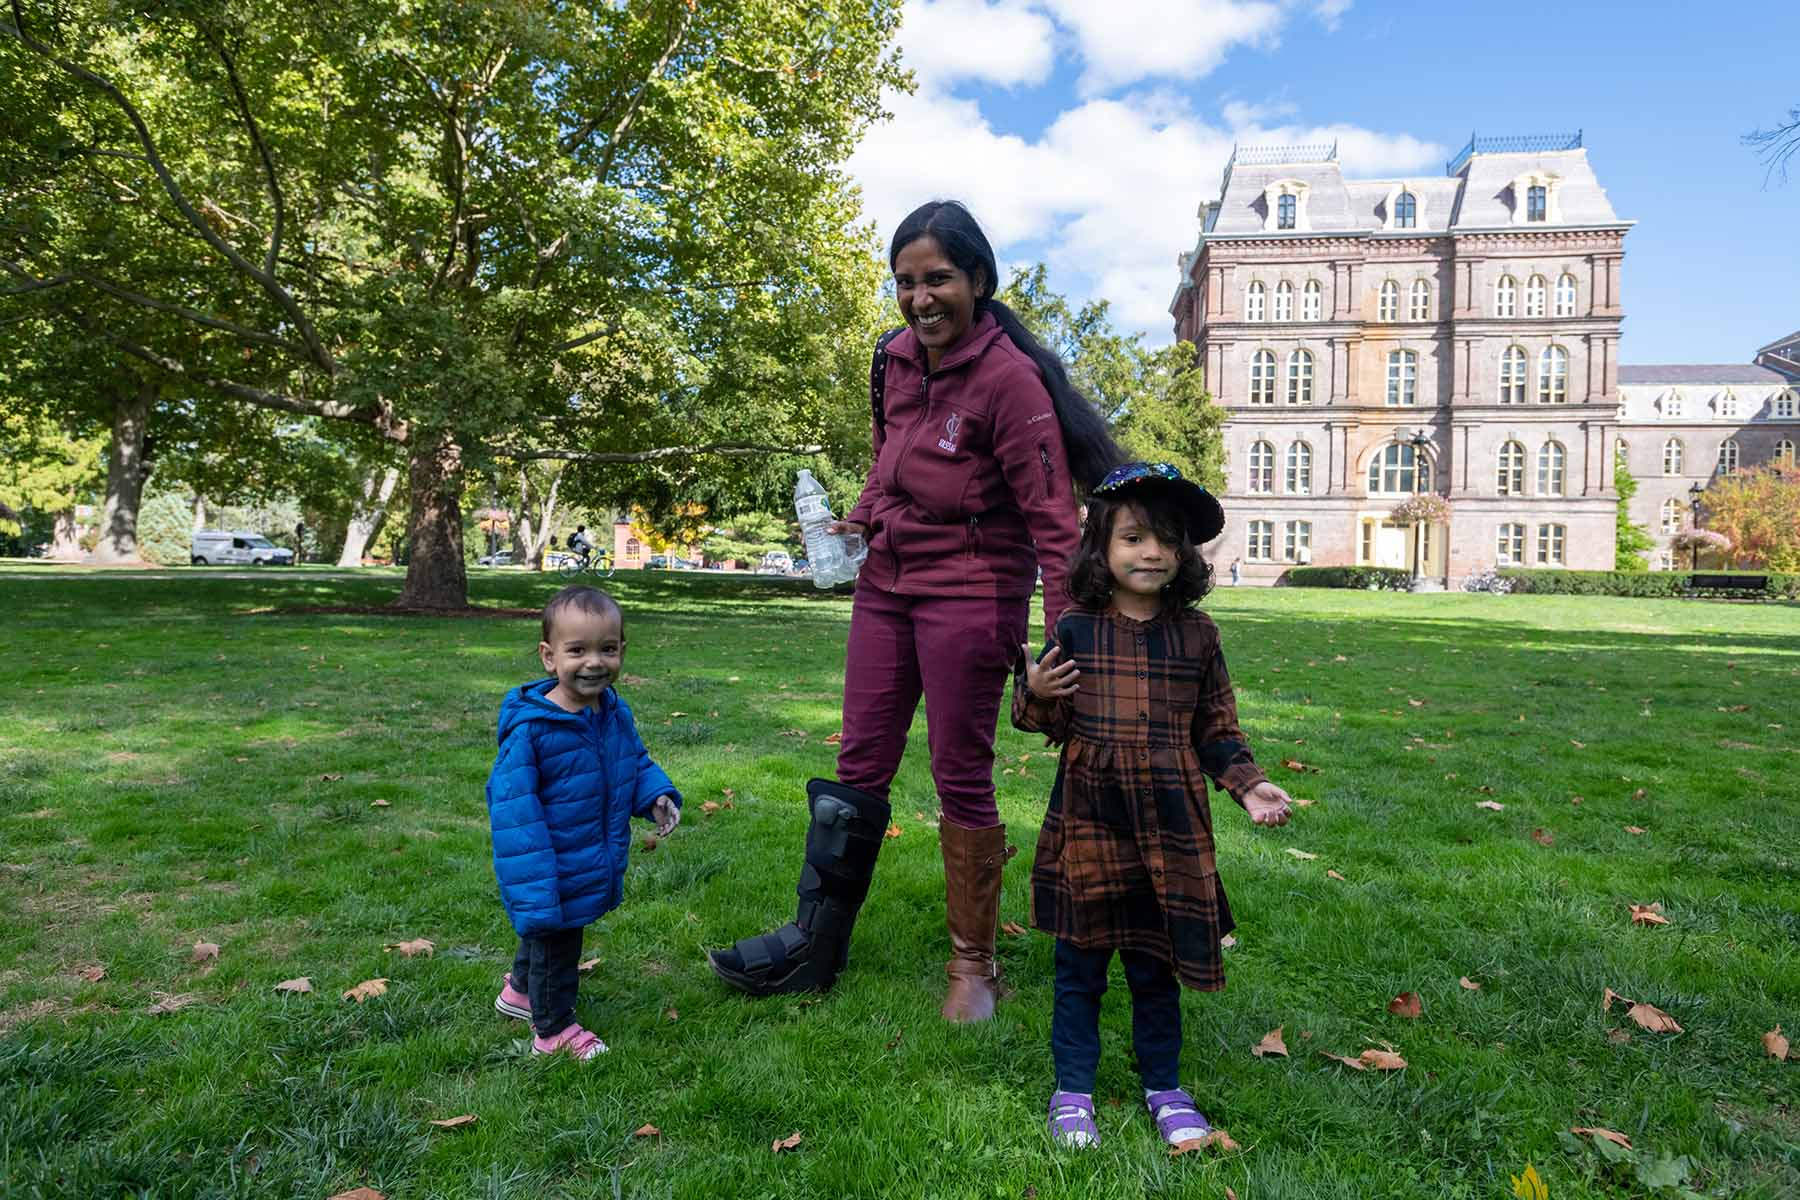 Woman with black cast on right foot/leg standing on lawn with 2 kids with Main Building in the background